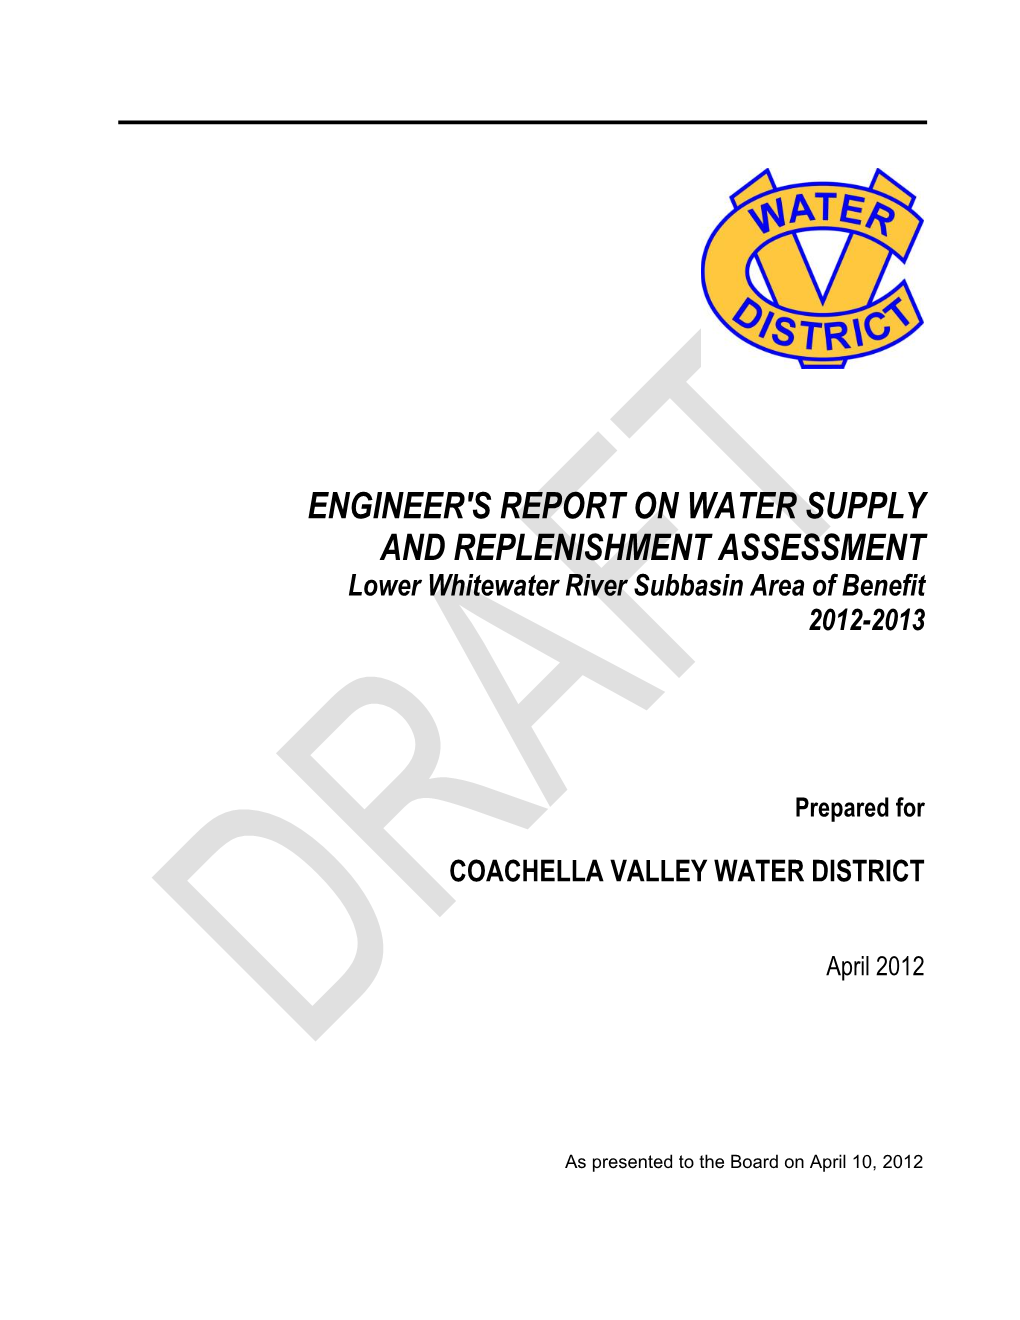 ENGINEER's REPORT on WATER SUPPLY and REPLENISHMENT ASSESSMENT Lower Whitewater River Subbasin Area of Benefit 2012-2013